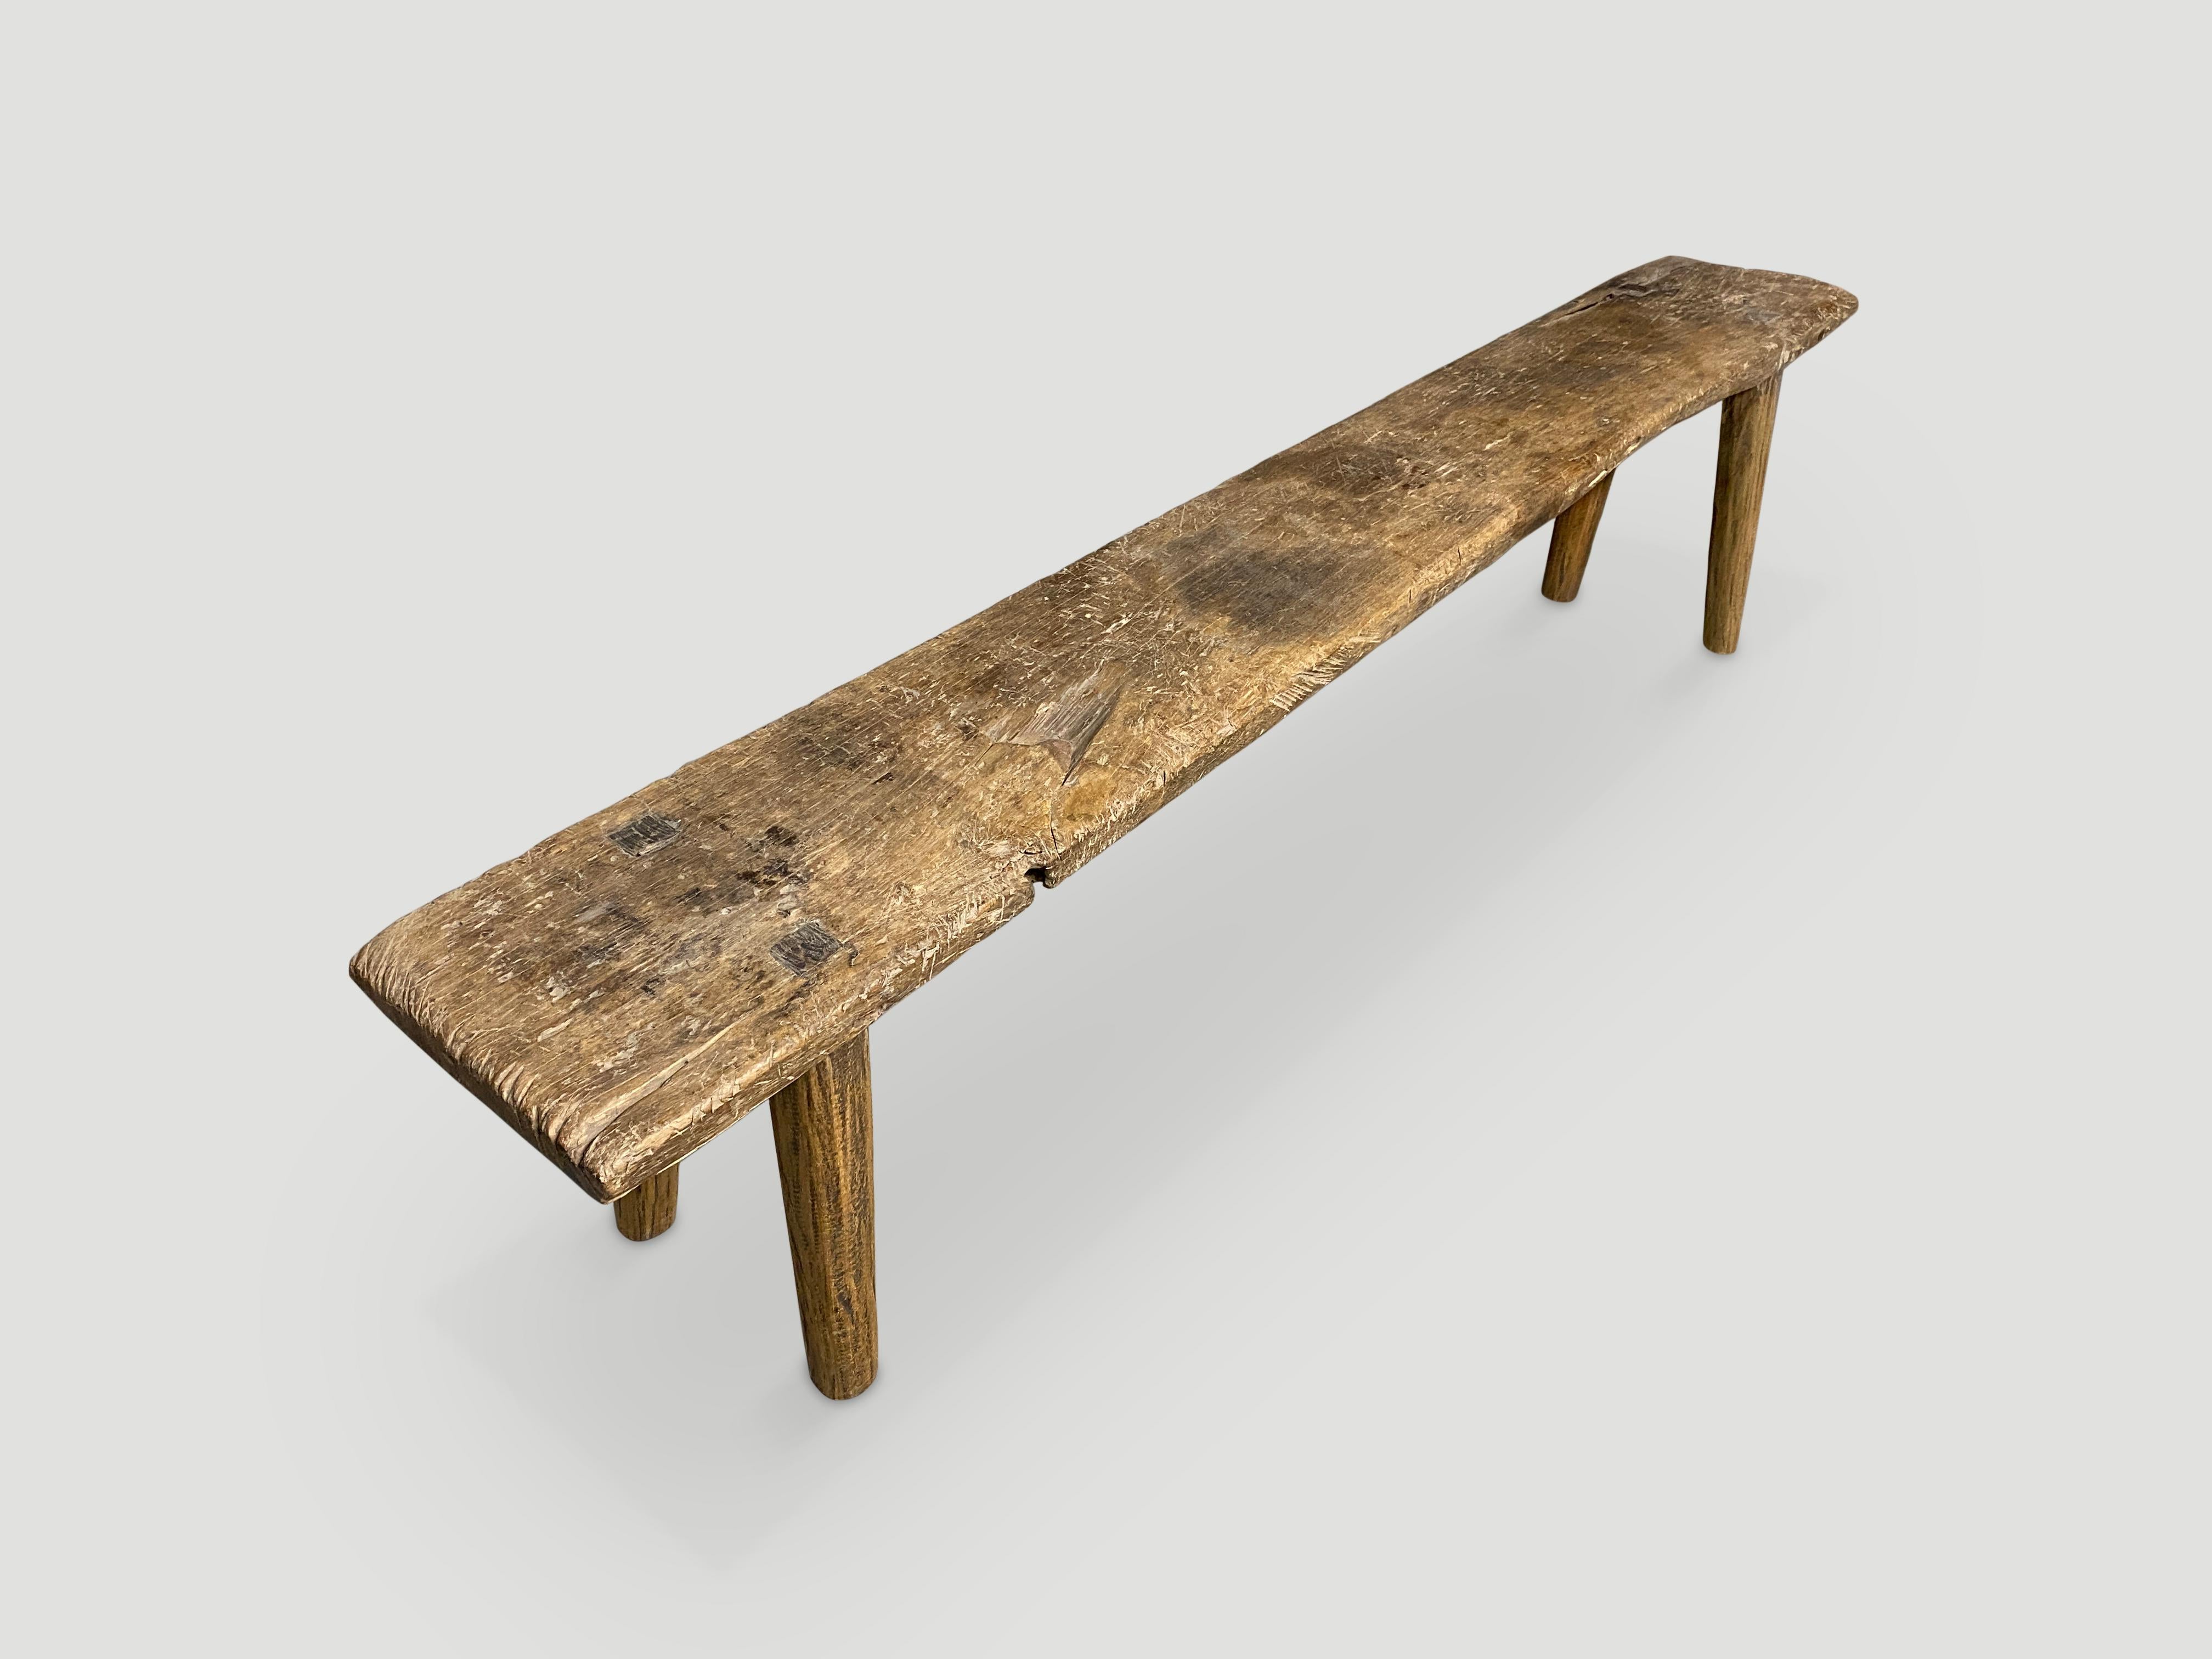 Antique hand carved Wabi Sabi bench. A single thick slab of teak celebrating the cracks and crevices and all the other marks that time and loving use have left behind. We added smooth teak minimalist legs.

This bench was hand made in the spirit